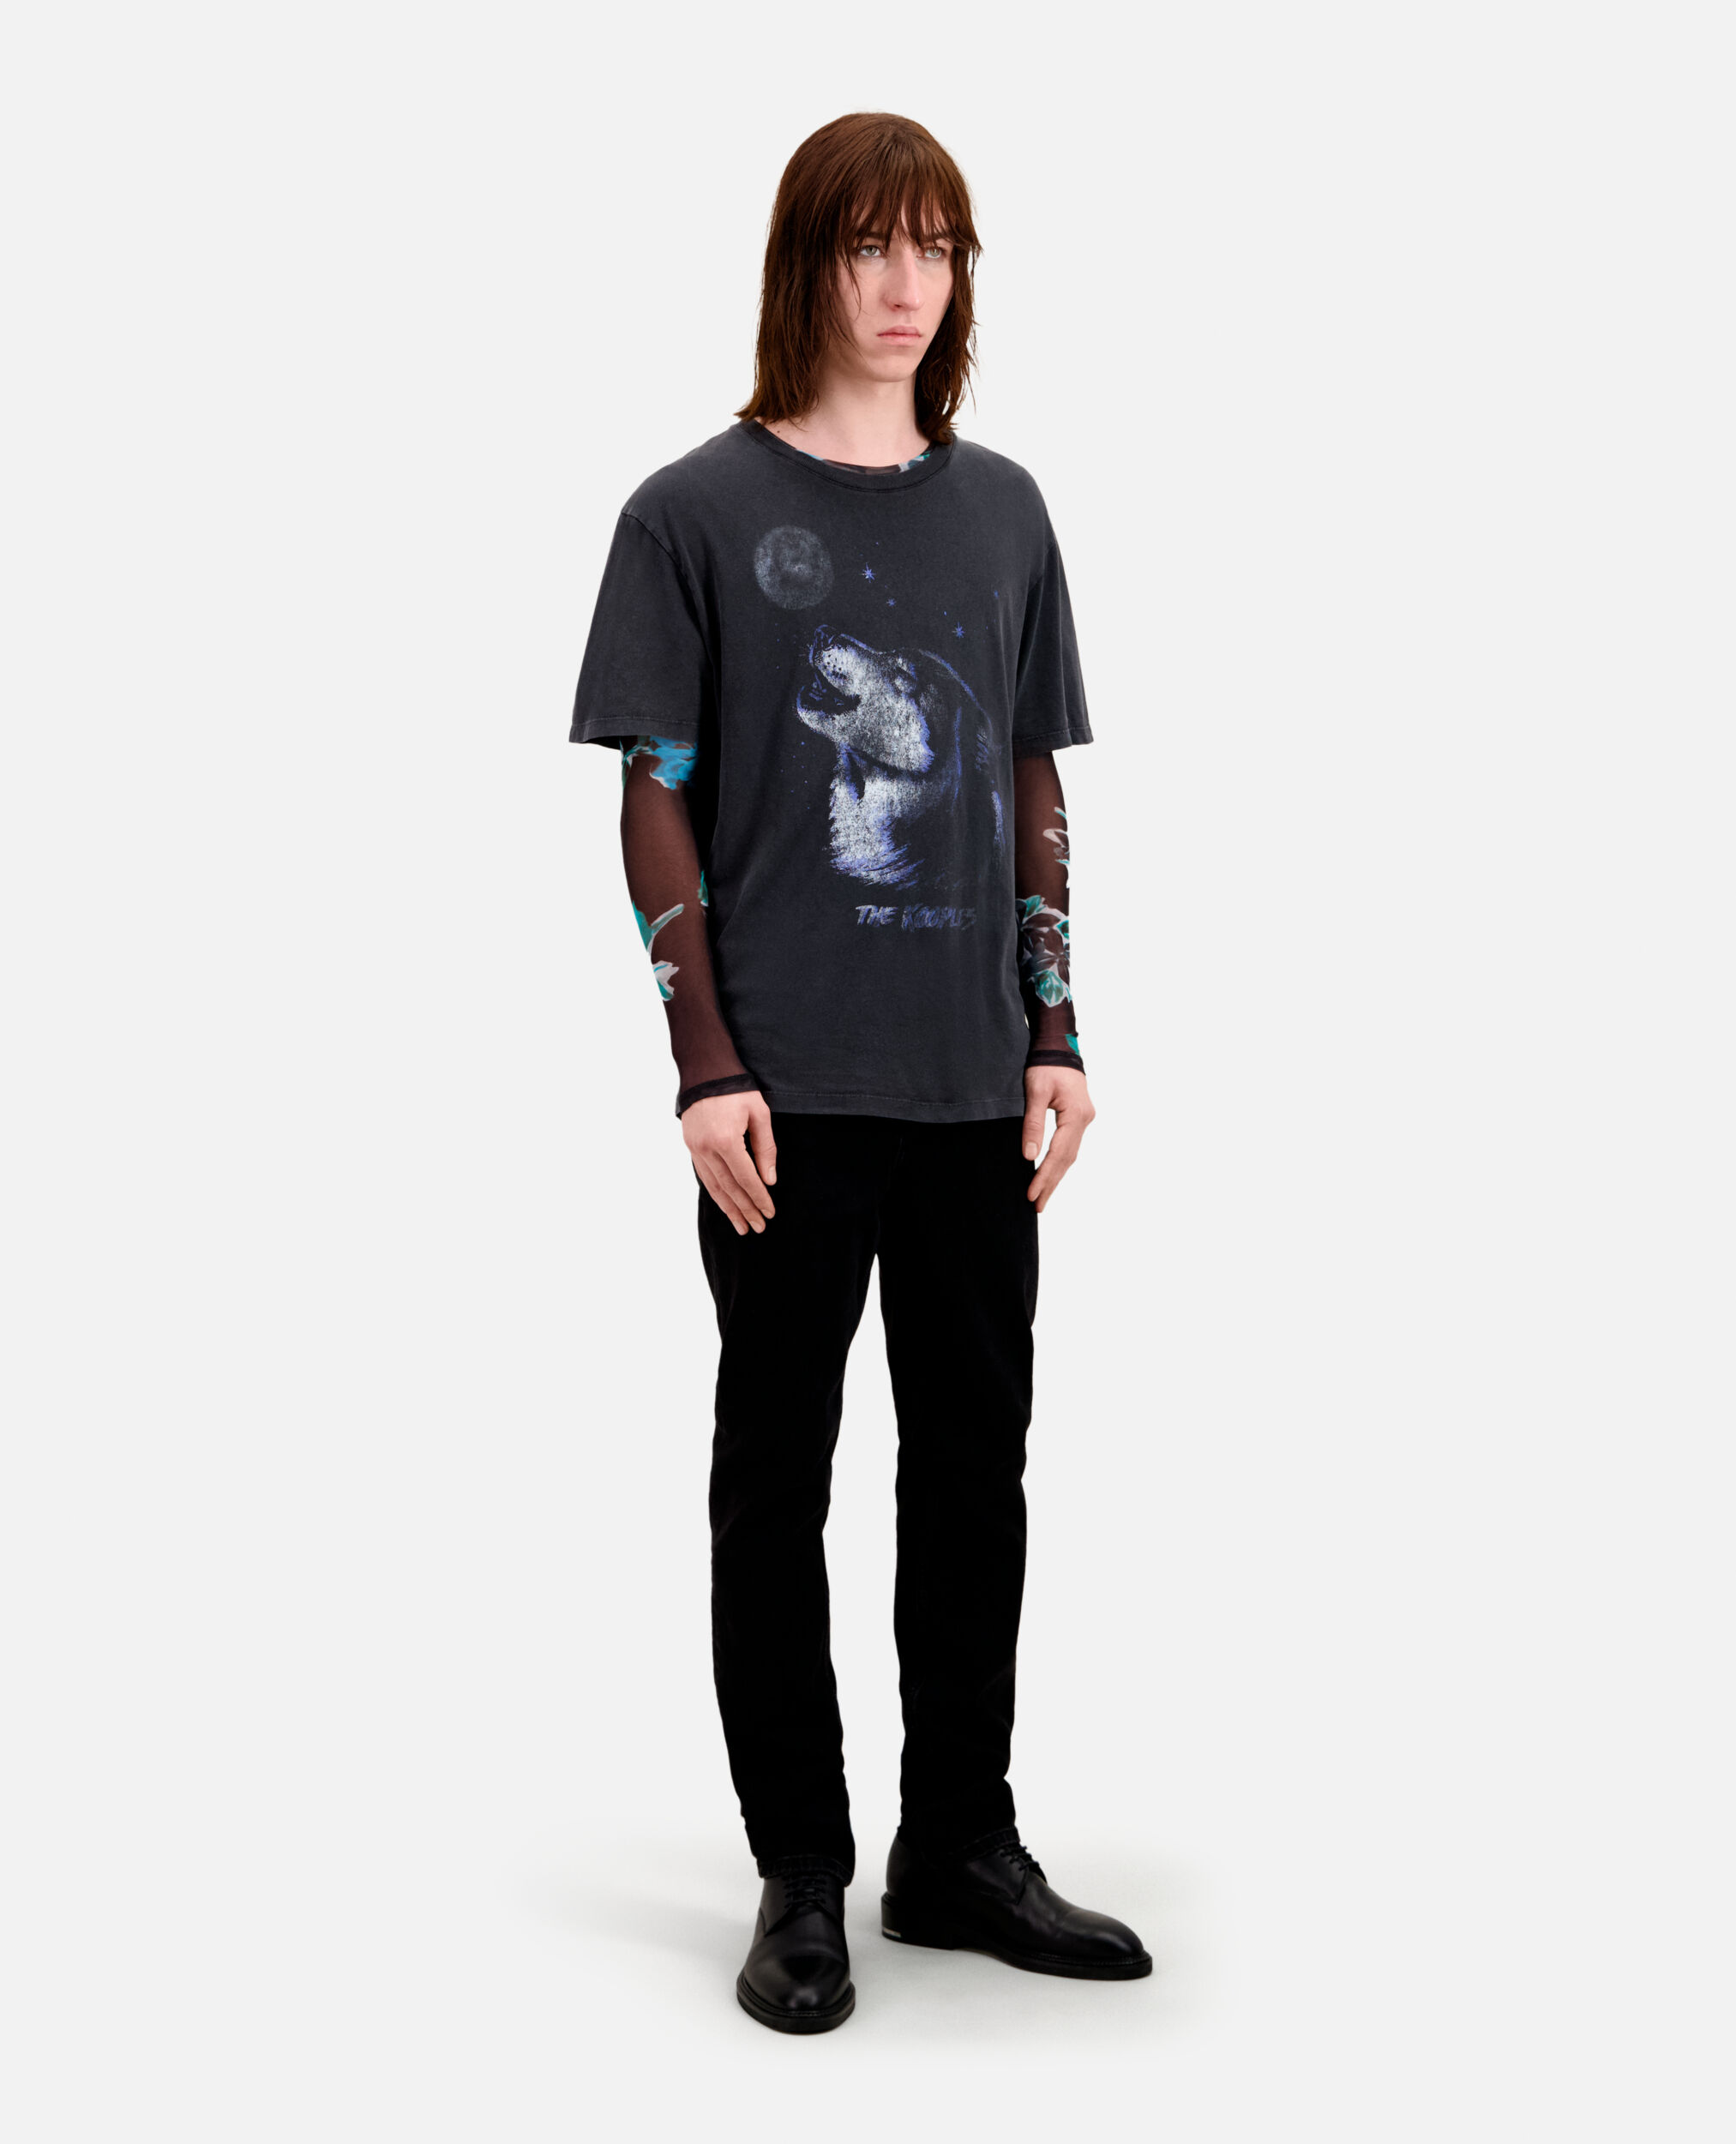 Men's black t-shirt with wolf serigraphy, BLACK WASHED, hi-res image number null